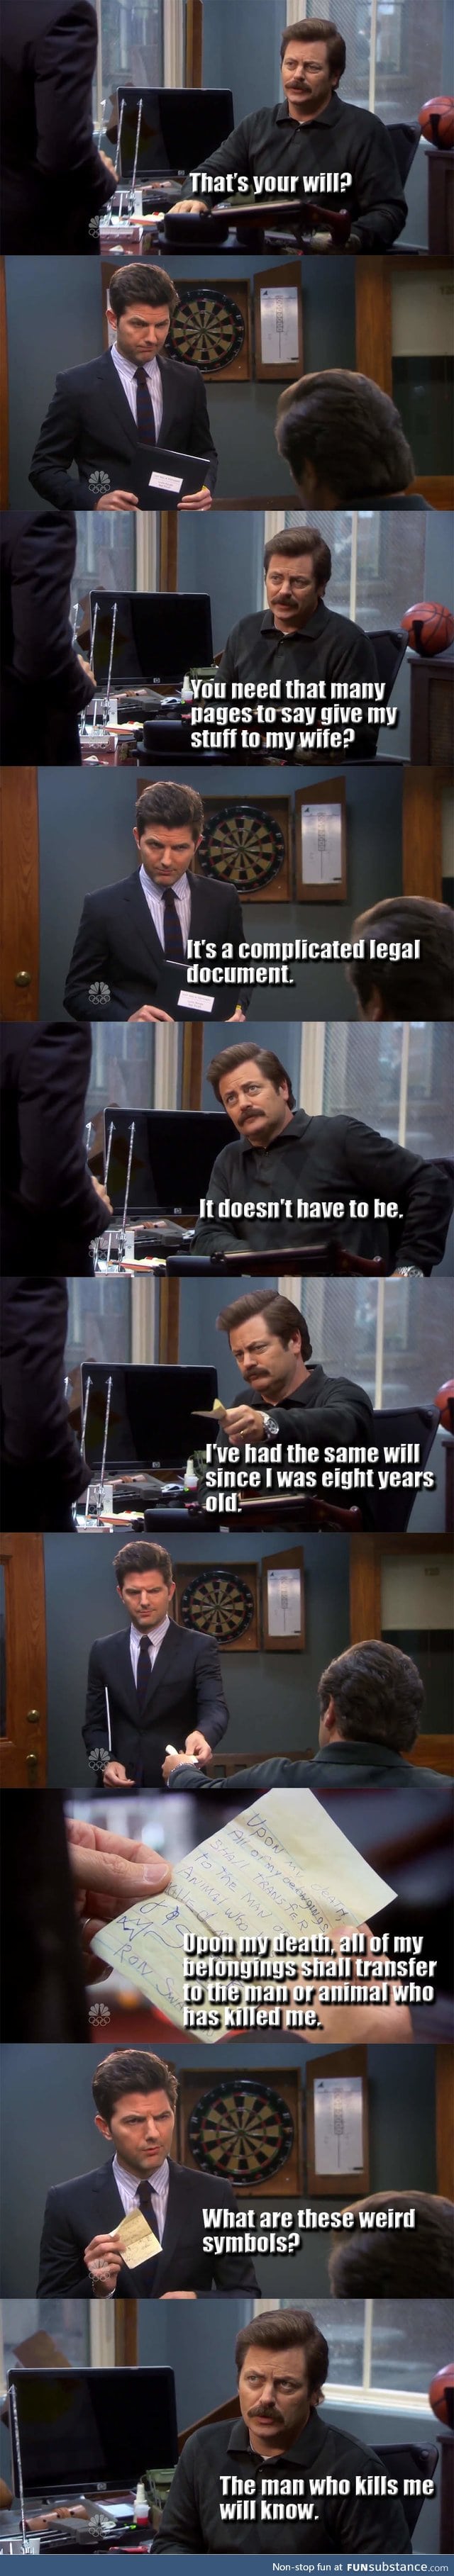 The will of the great Ron Swanson